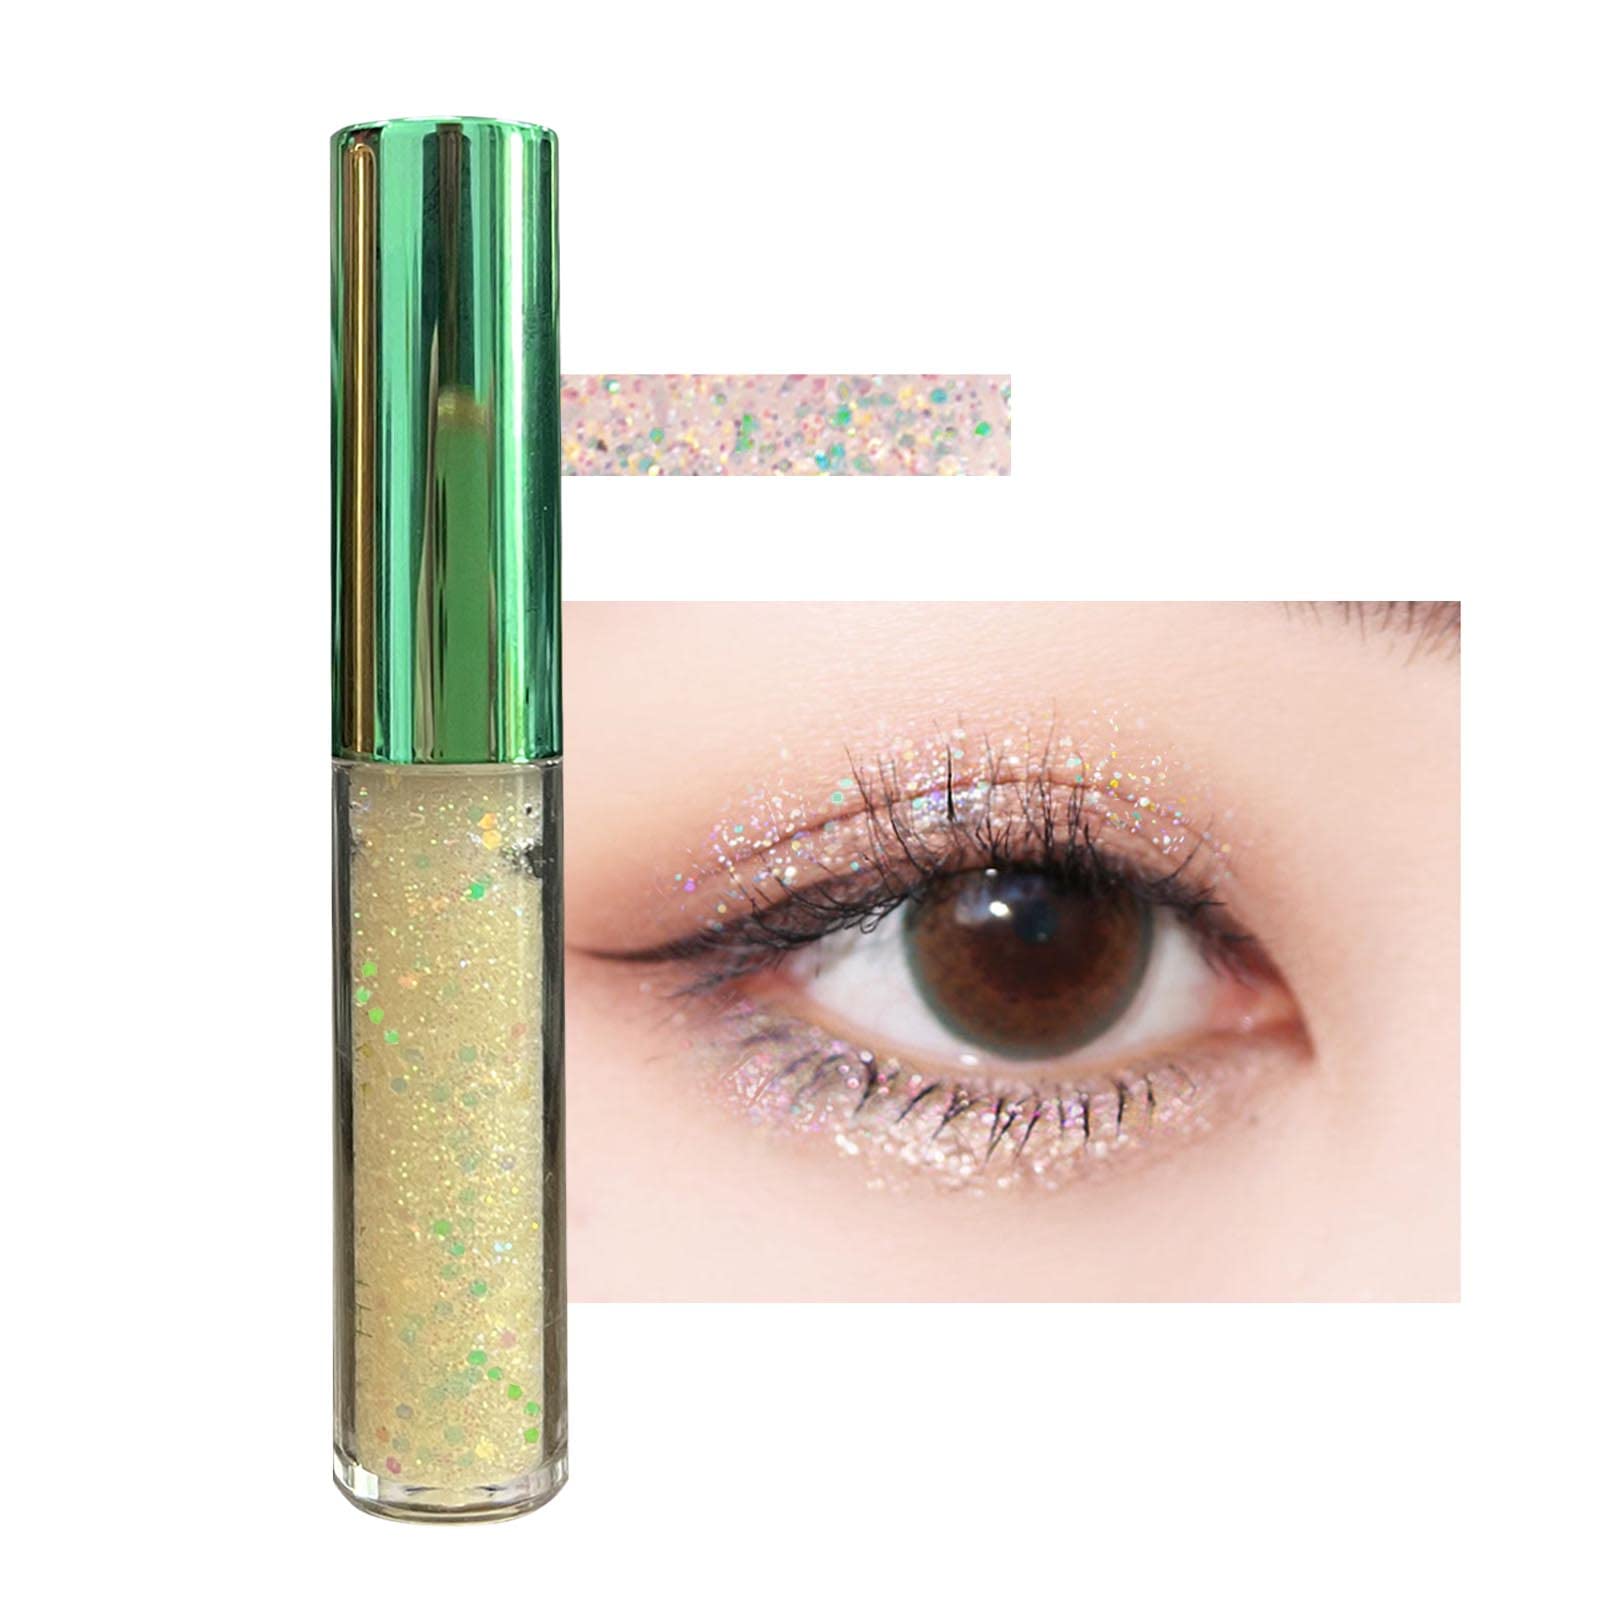 Pigmented Glitter Eyeshadow Easy To Apply, Loose Glitter Glue For